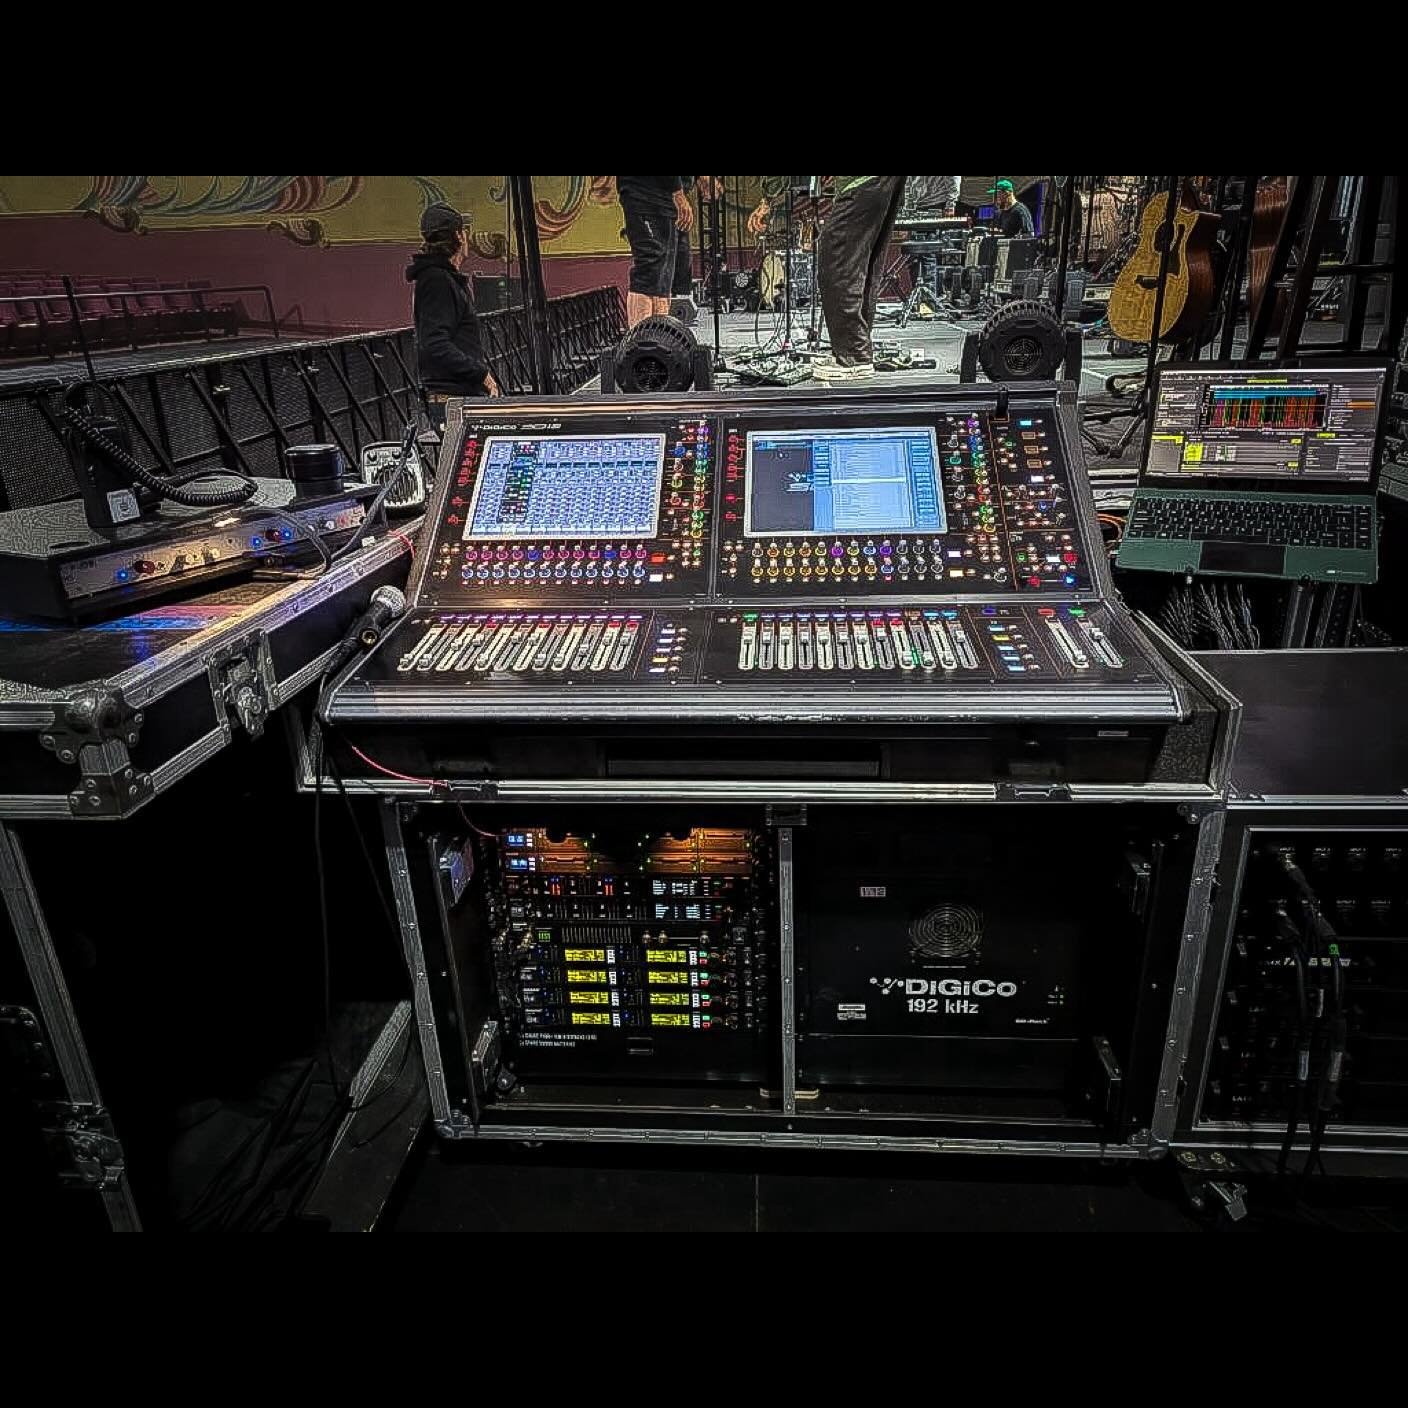 Telesonix x Sound Image on tour with @mattsvc and @xambassadors.

Telesonix is providing 8 mixes of @shure PSM1000 G10 IEMs, 8 Channels of Axient Digital handhelds and instrument wireless, one @rupert_neve 5045 primary source enhancer, and a @fiasco_